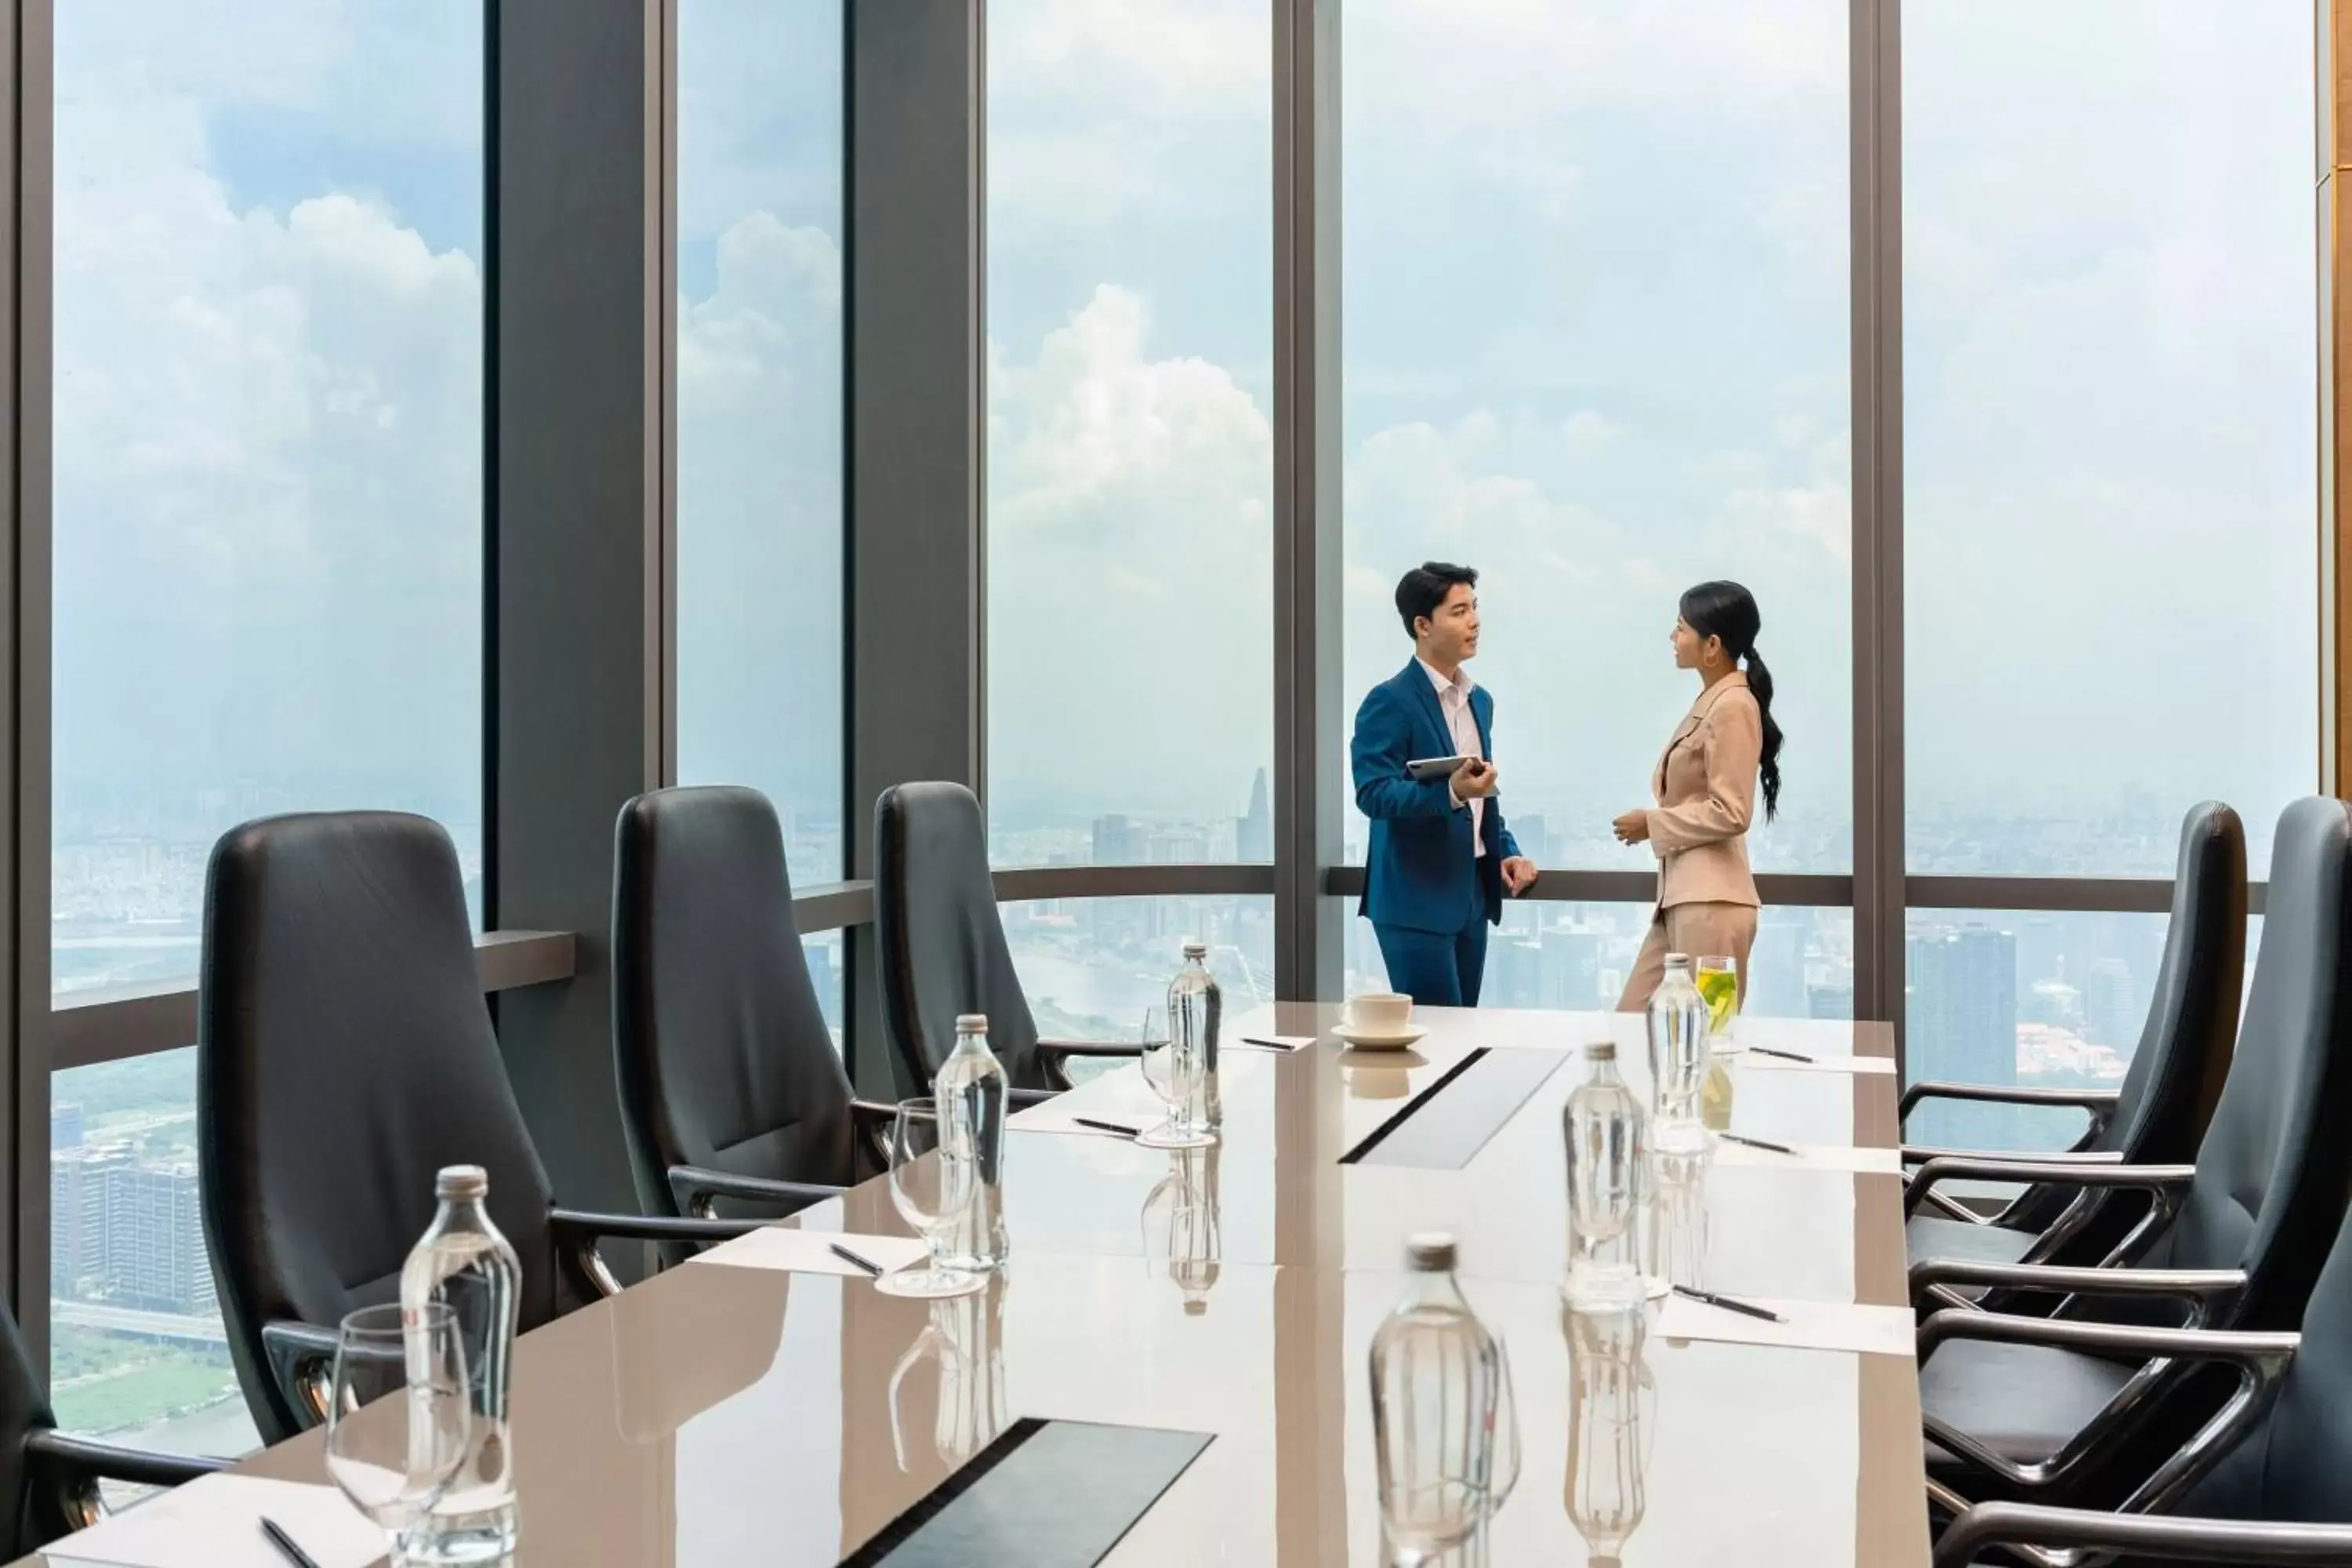 Meeting/conference room in Vinpearl Landmark 81, Autograph Collection